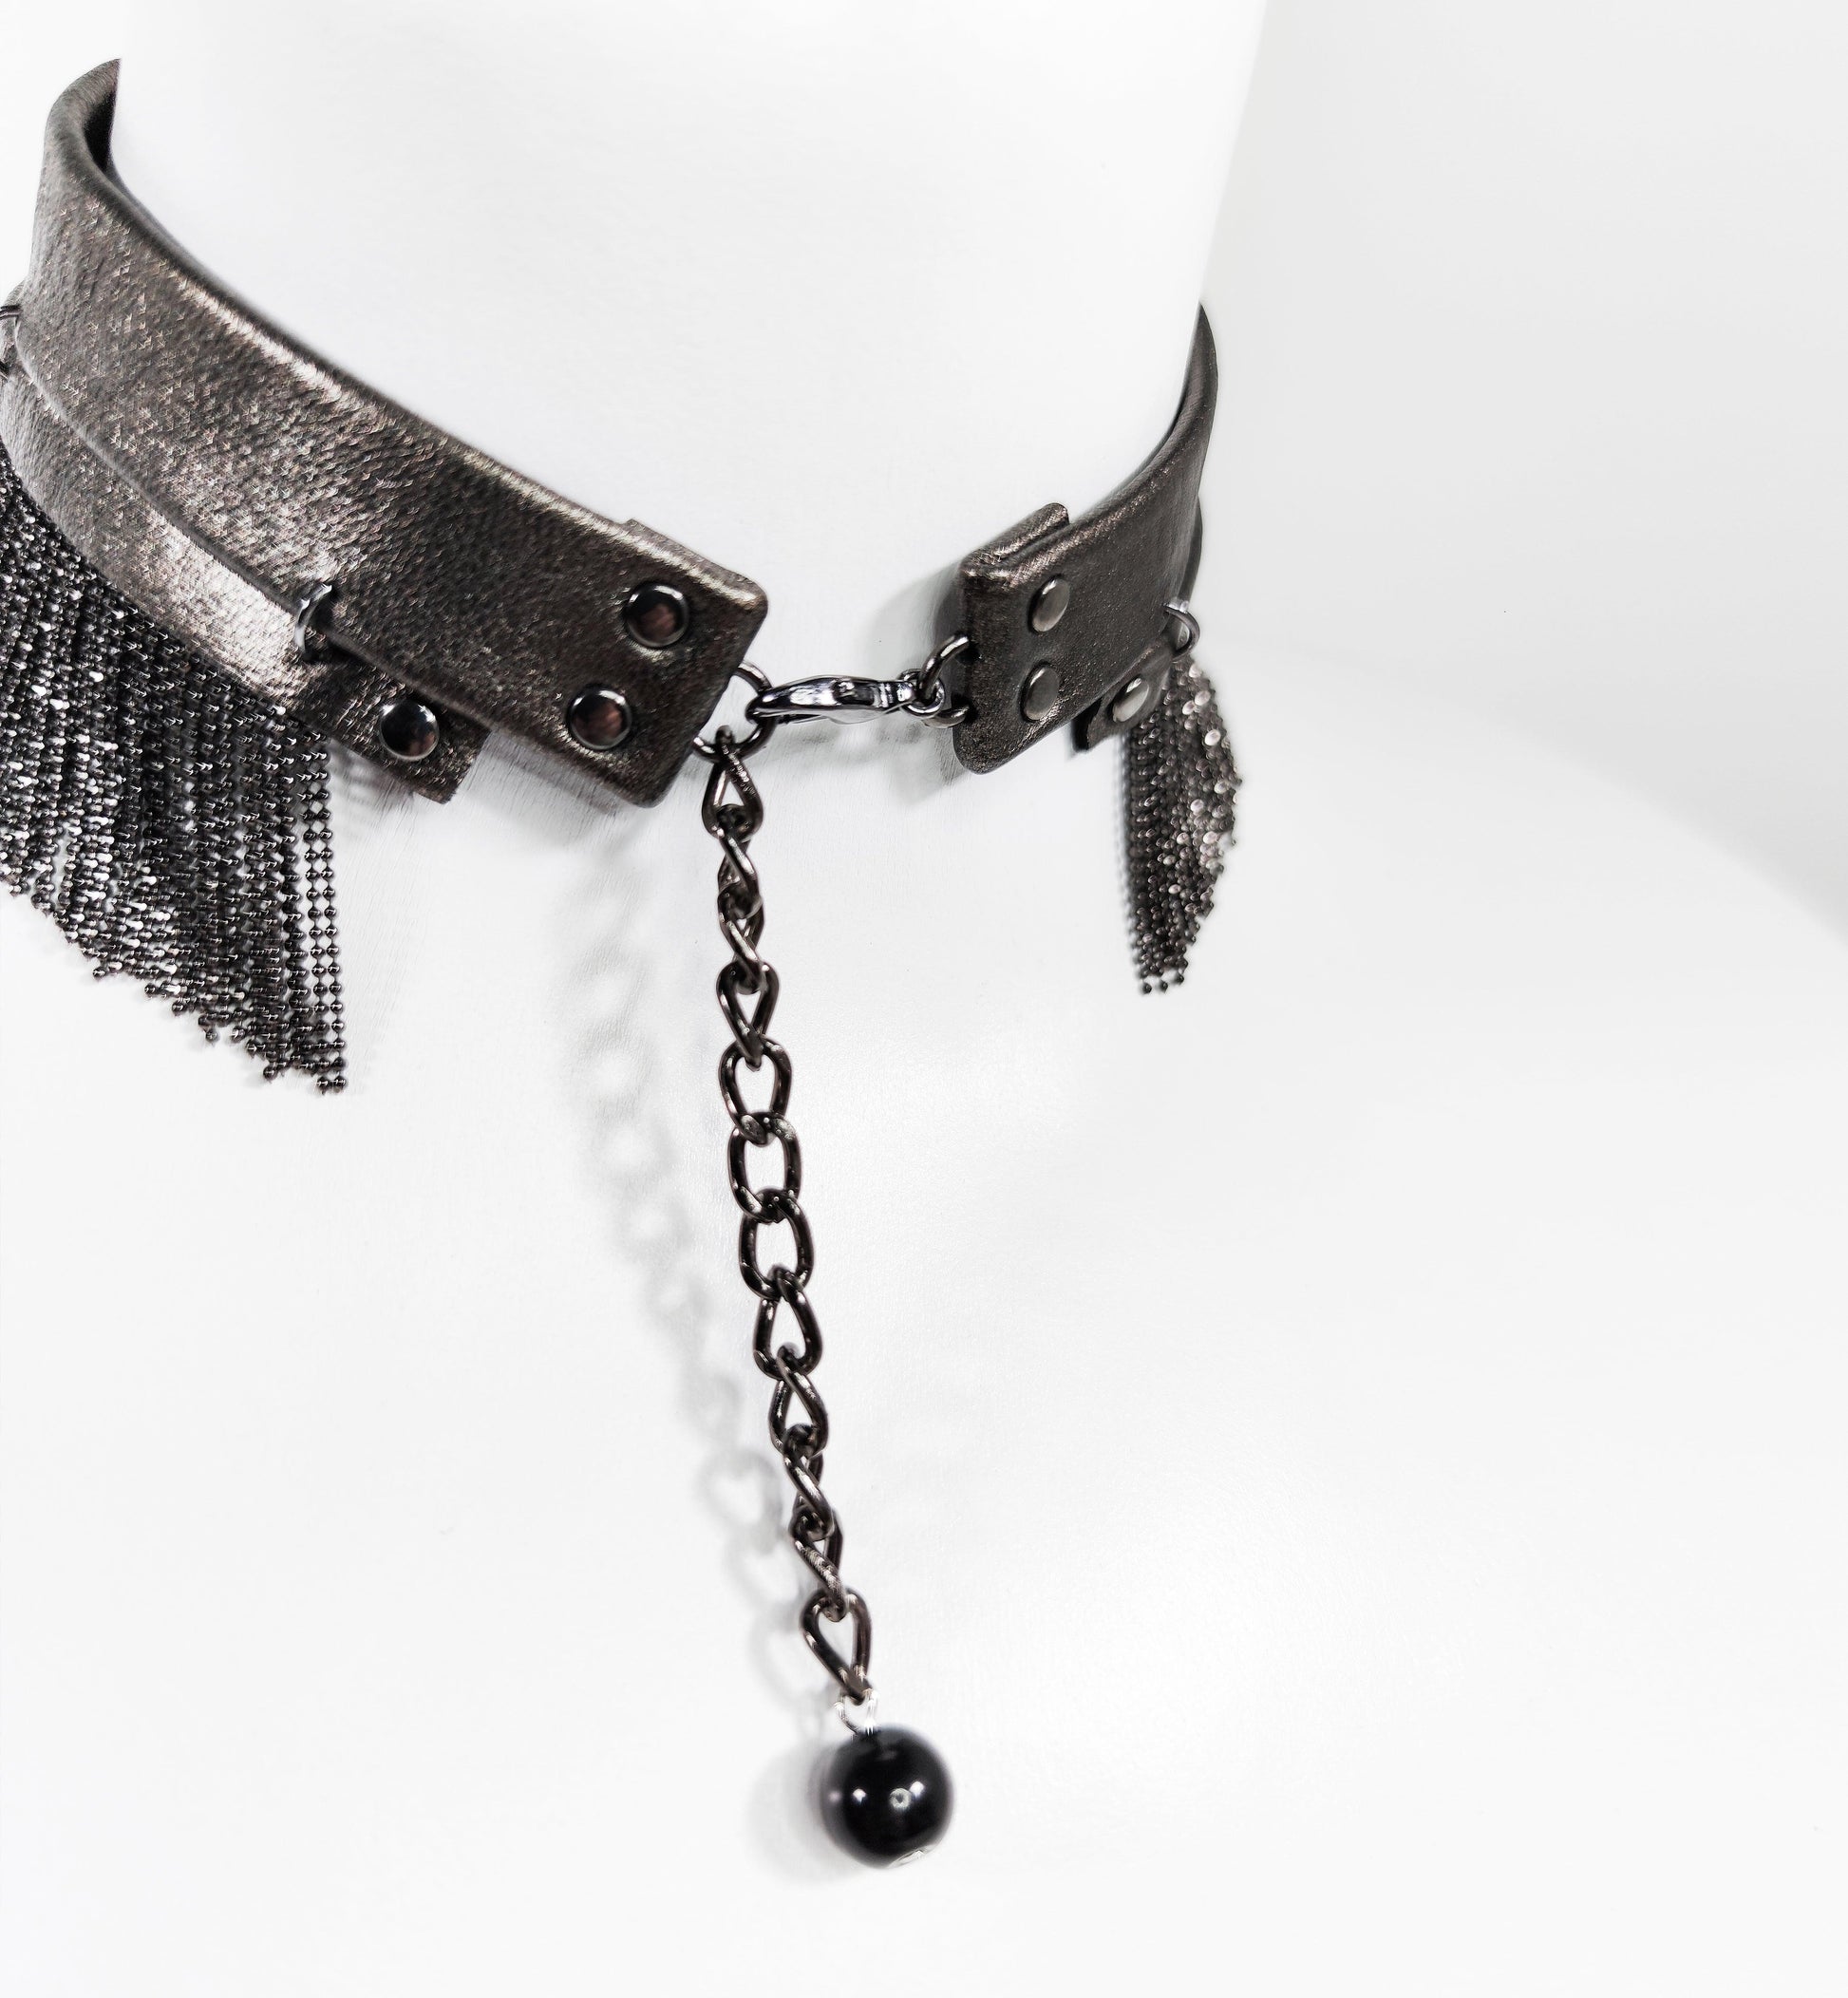 Exquisite detail of Short Leather Chocker with Chains showcasing the fine craftsmanship and elegant design characteristic of Axinia Collection 's luxury collection.